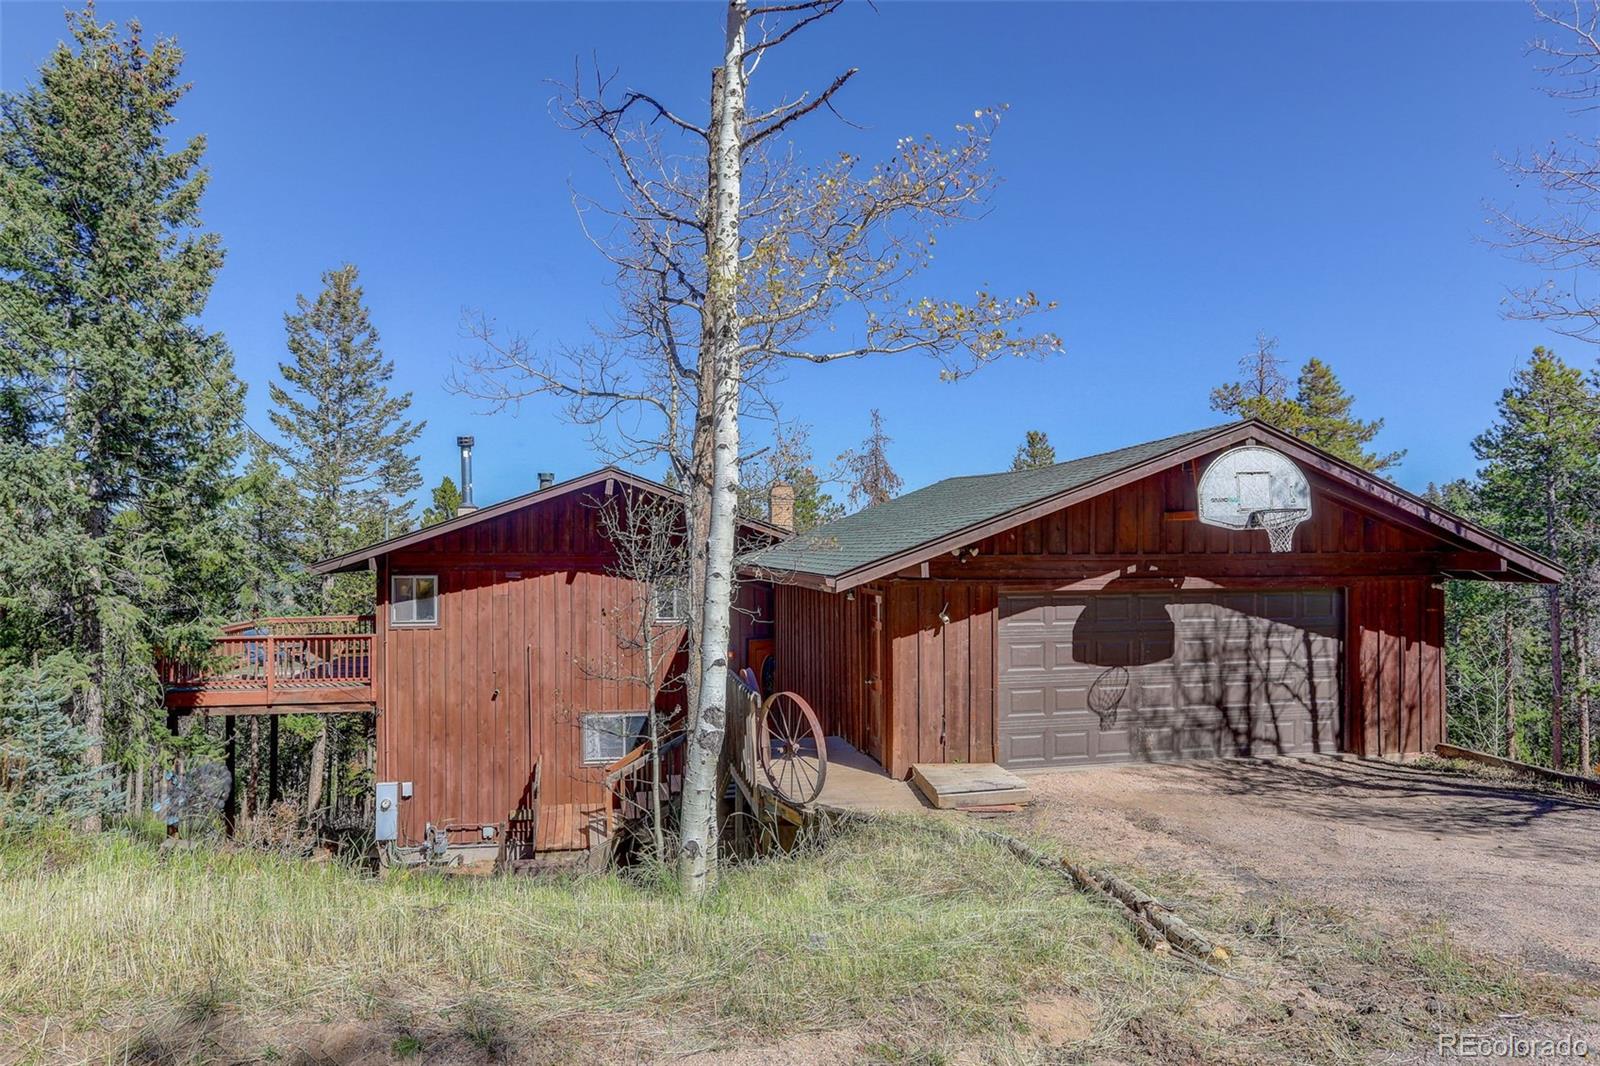 6863  snowshoe trail, Evergreen sold home. Closed on 2024-01-23 for $525,000.